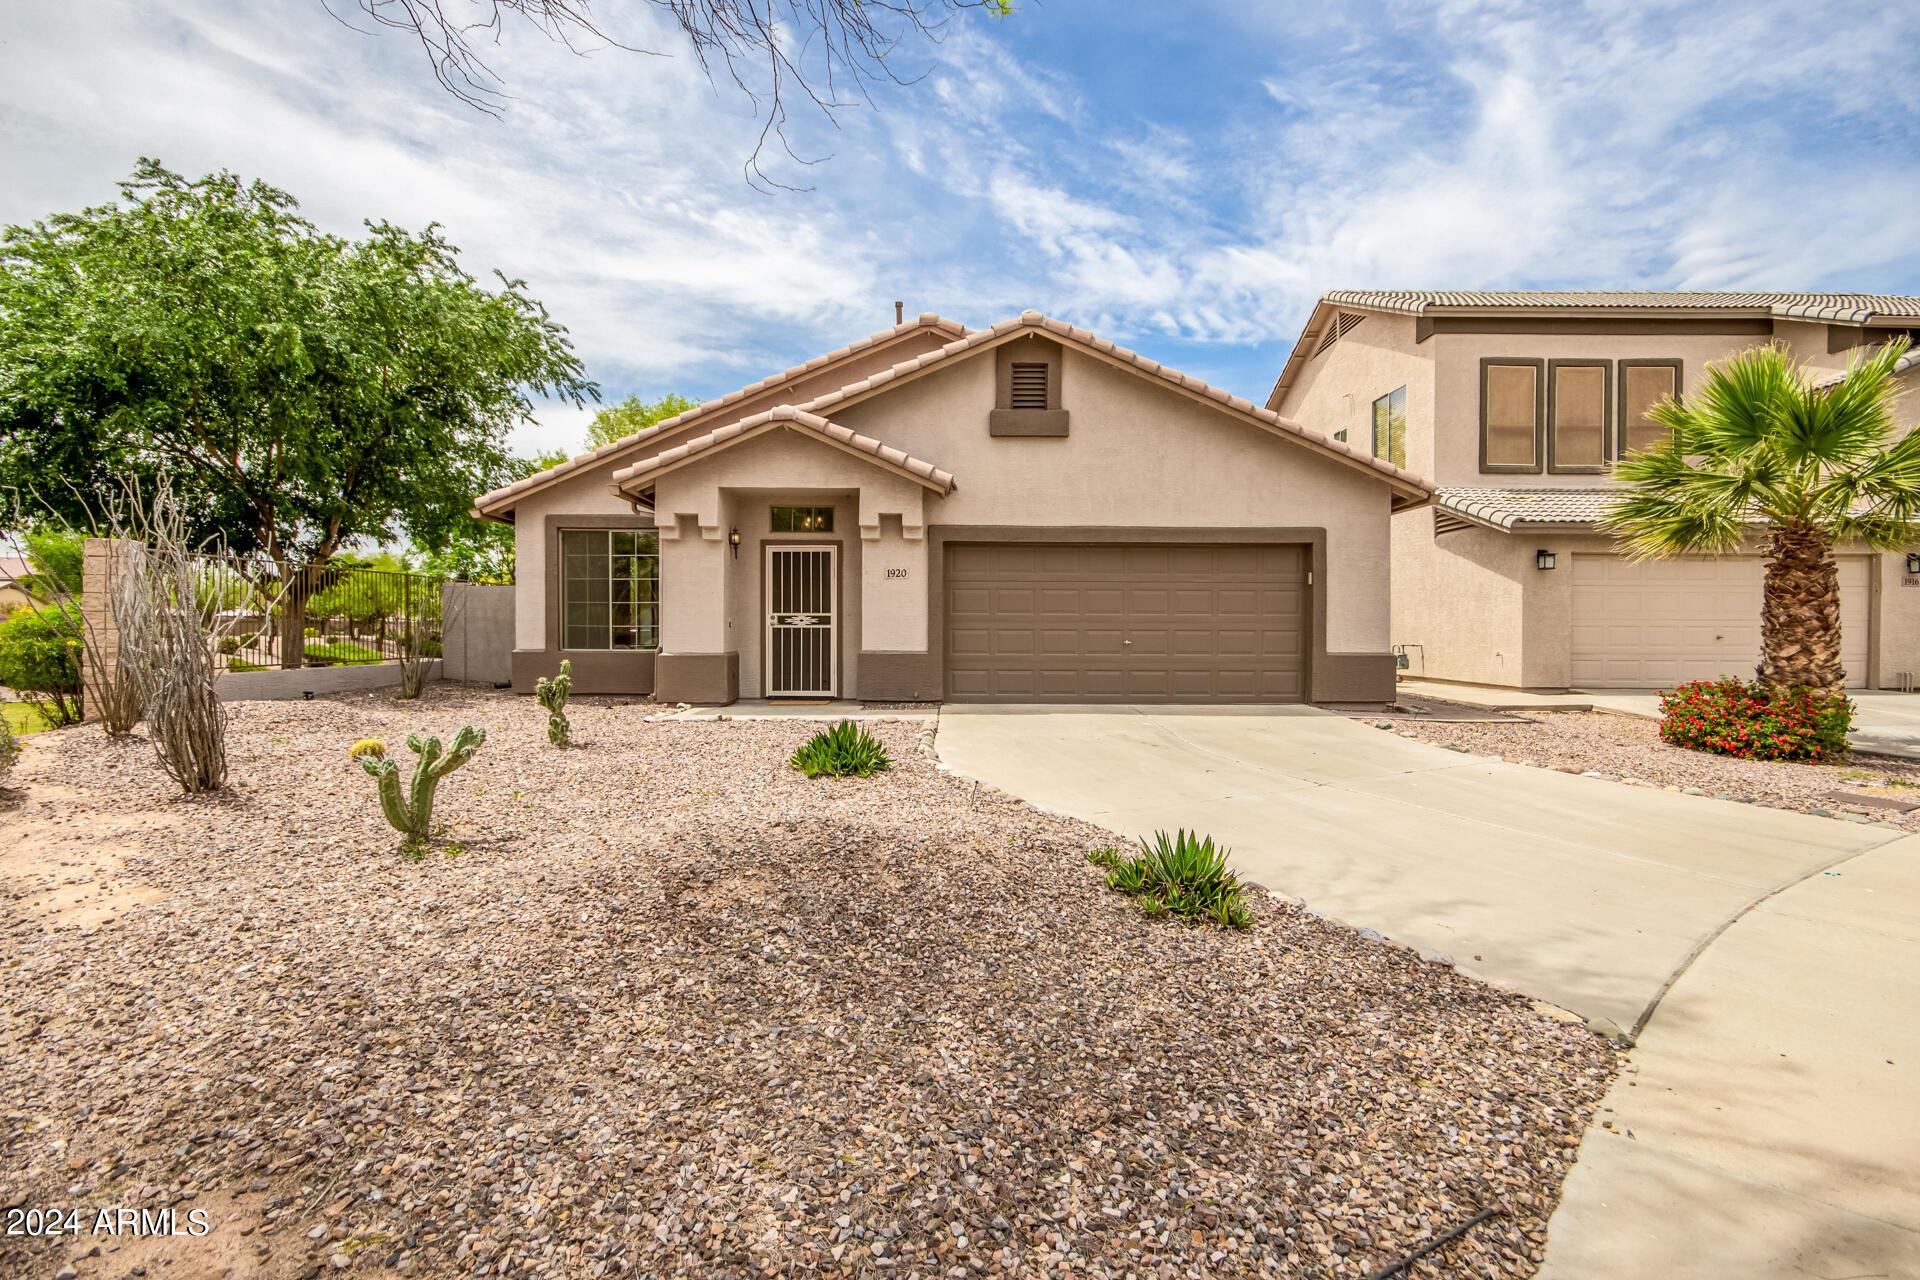 Photo one of 1920 S 83Rd Dr Tolleson AZ 85353 | MLS 6694288